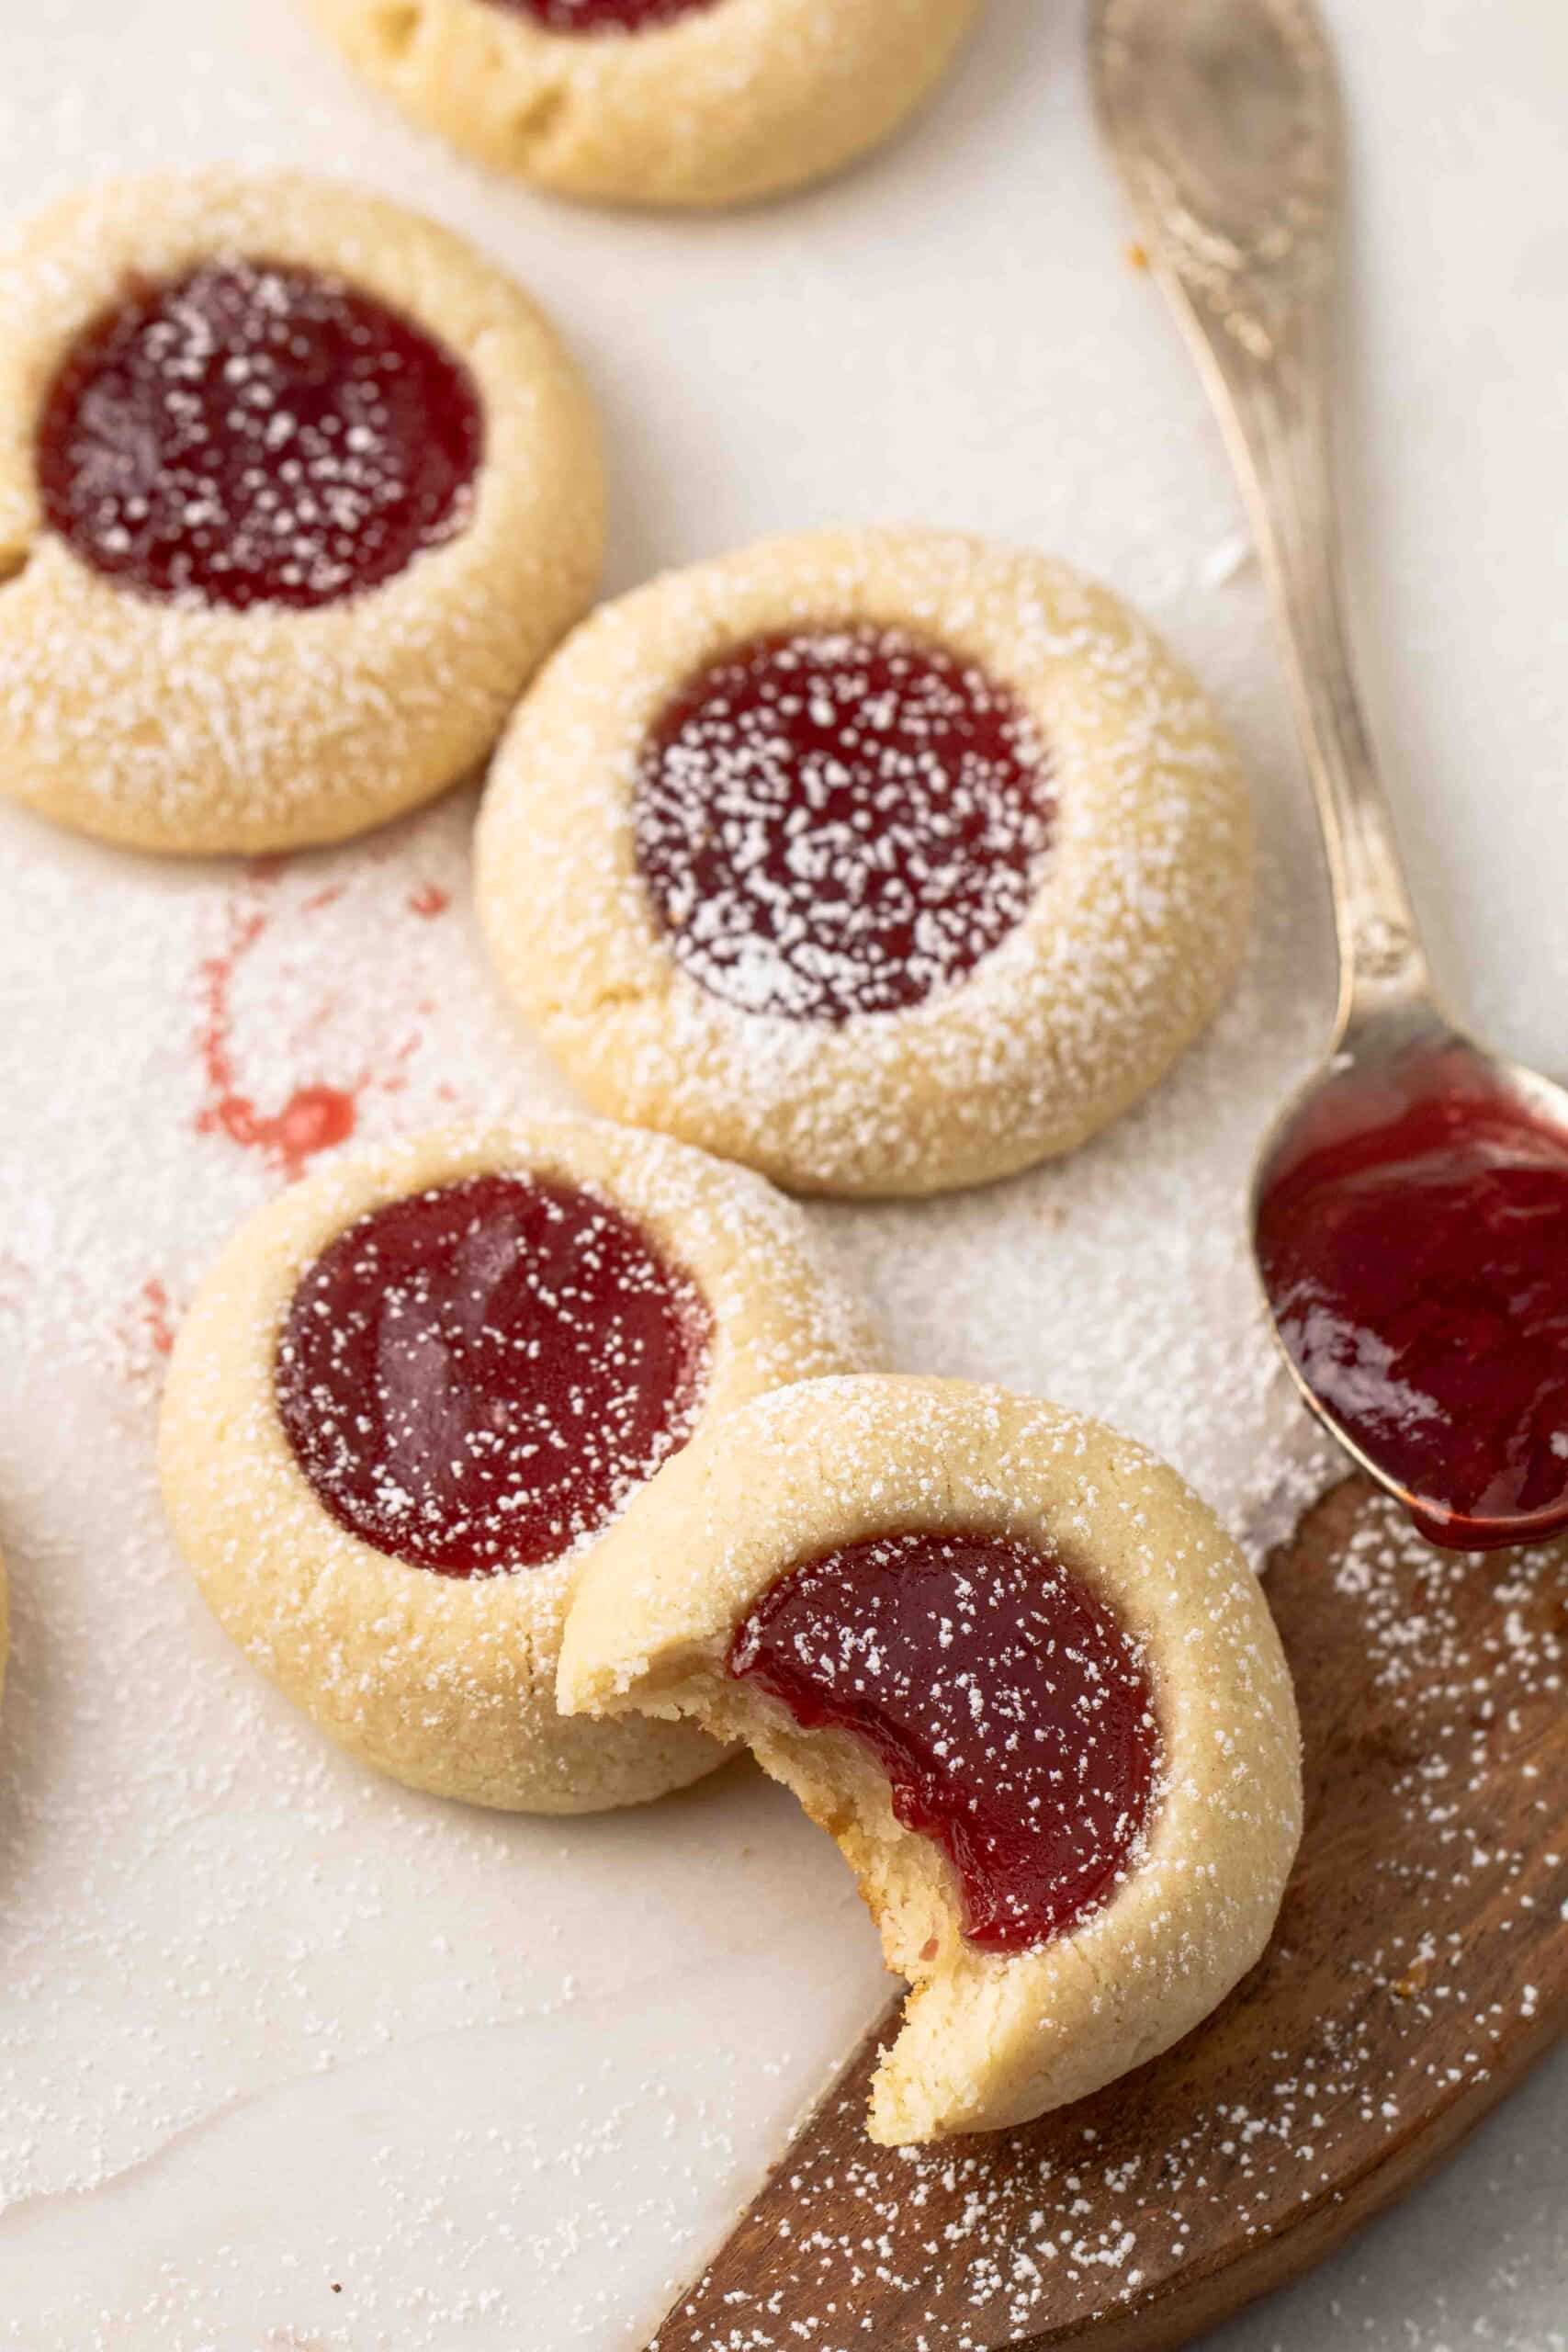 Strawberry thumbprint cookies with a spoon full of jam